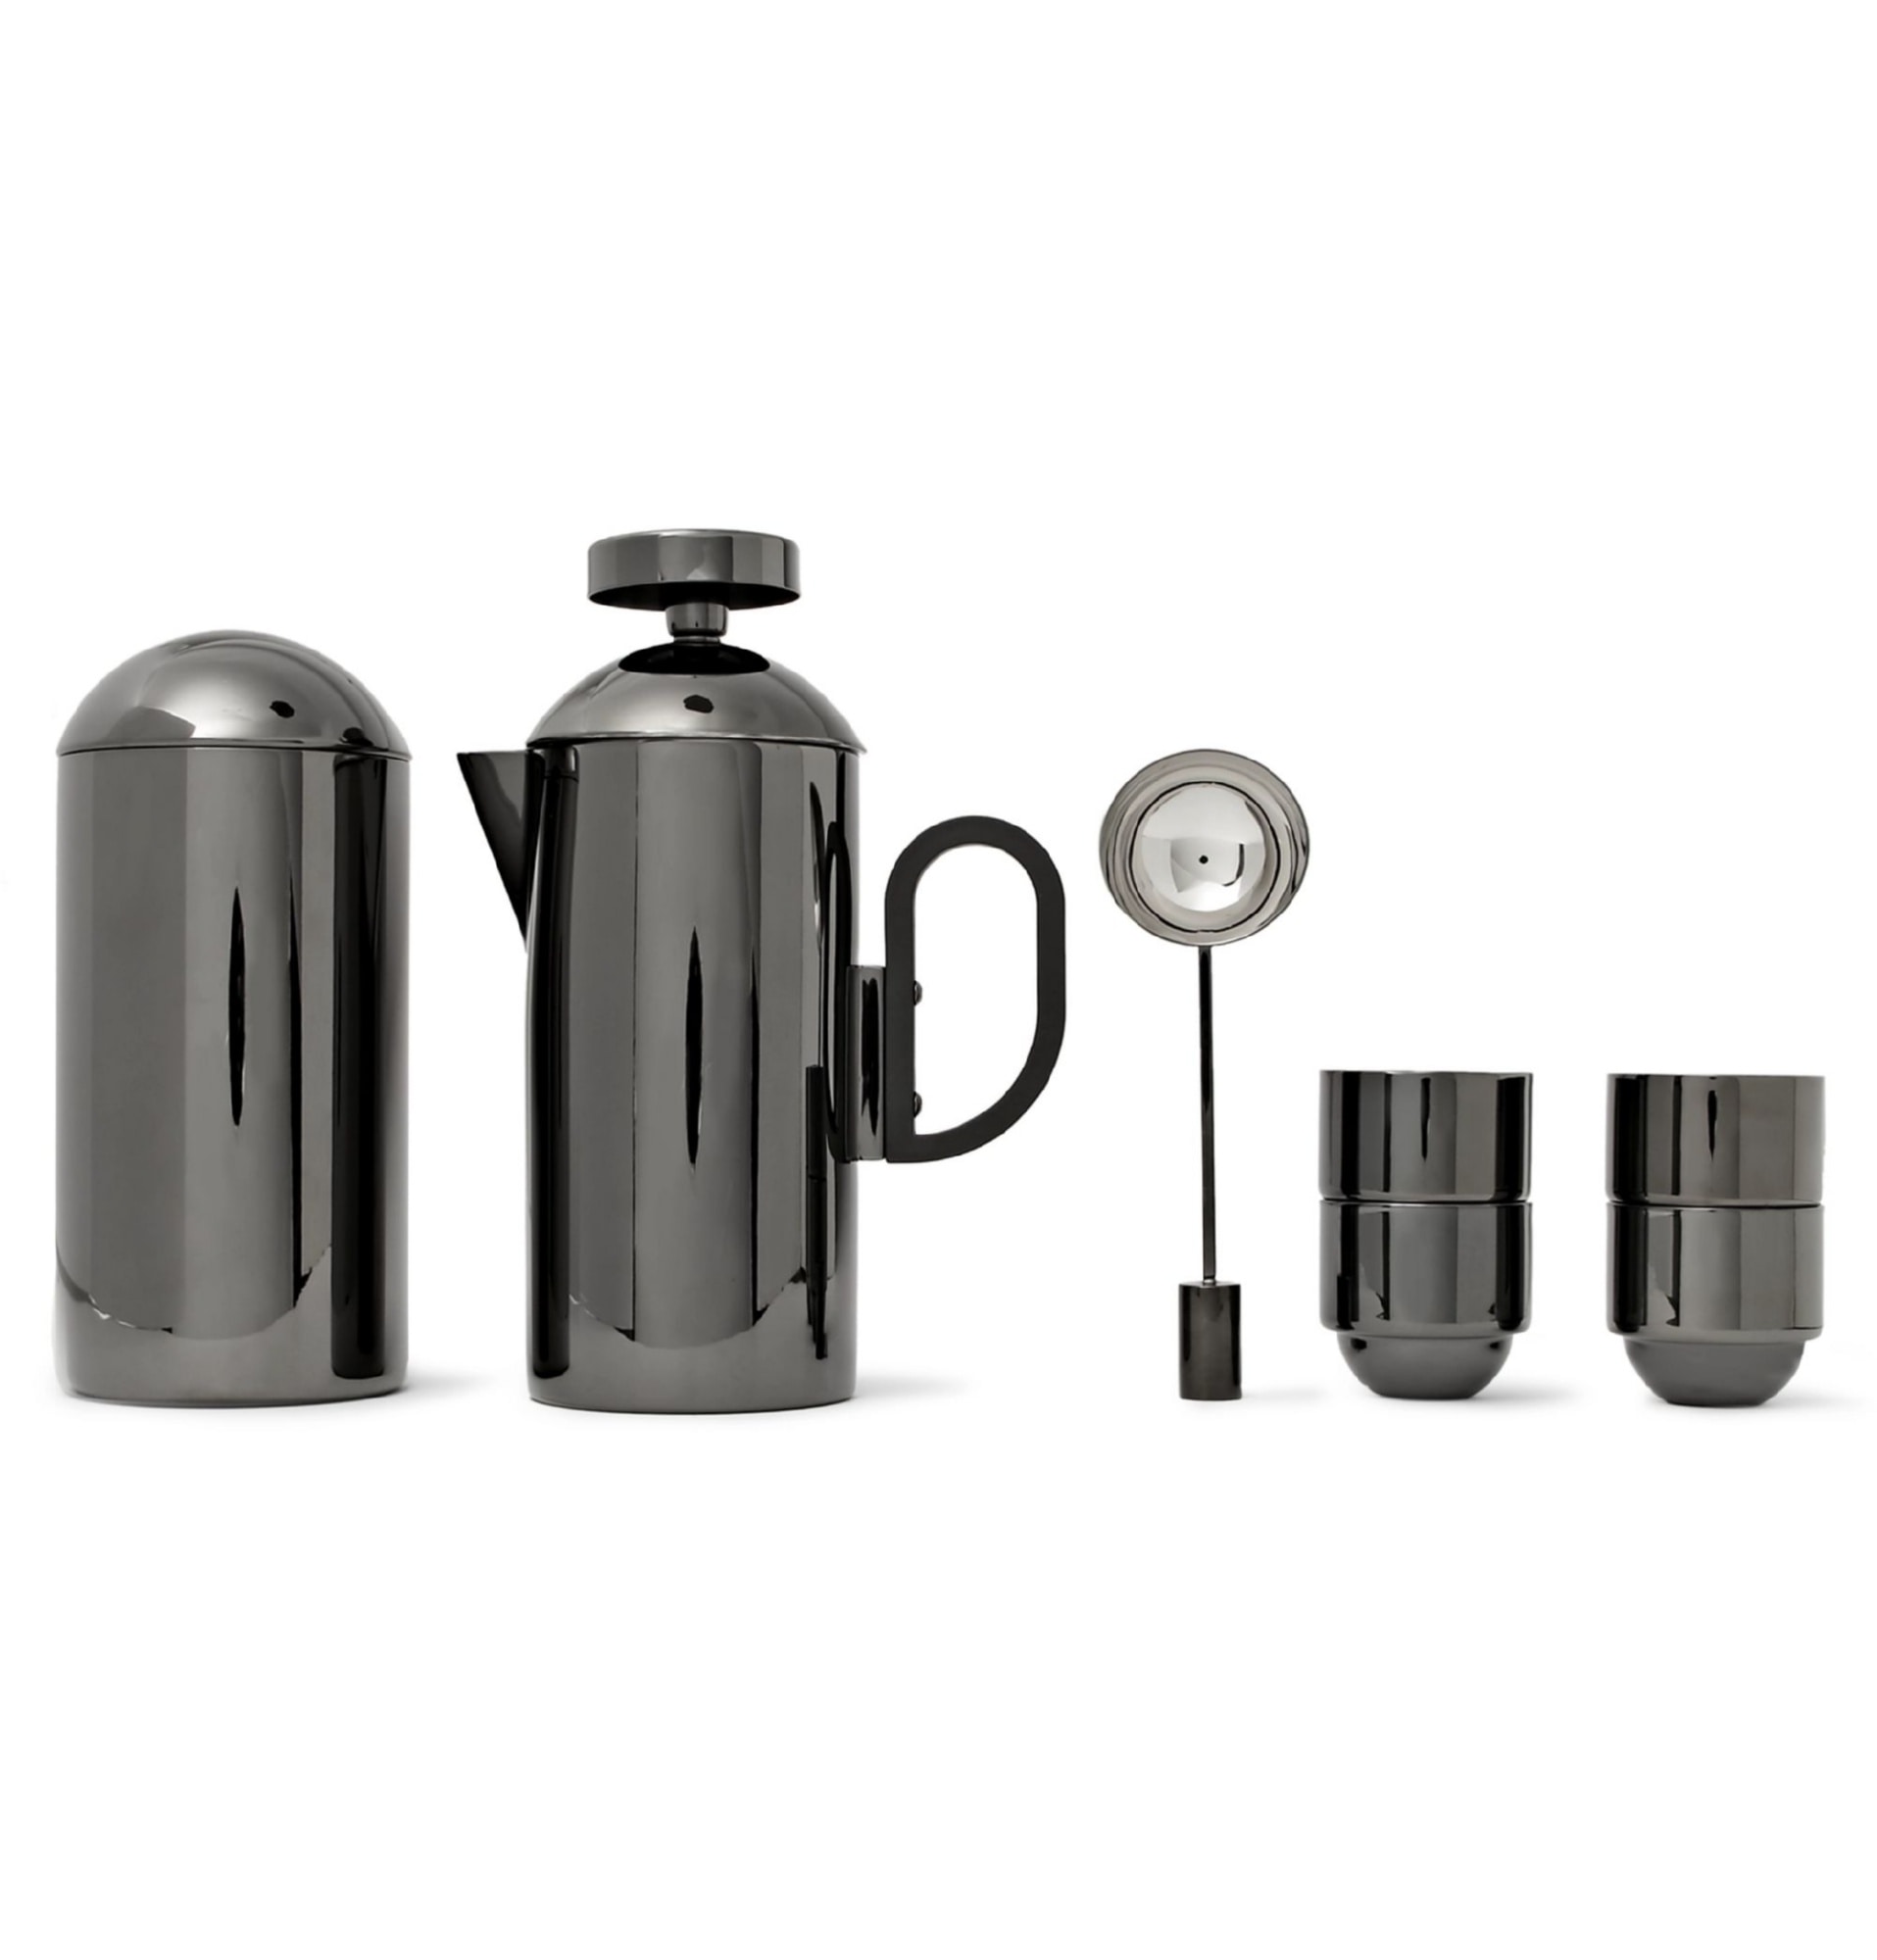 brew-coated-stainless-steel-cafetiere-set-3633577411207438